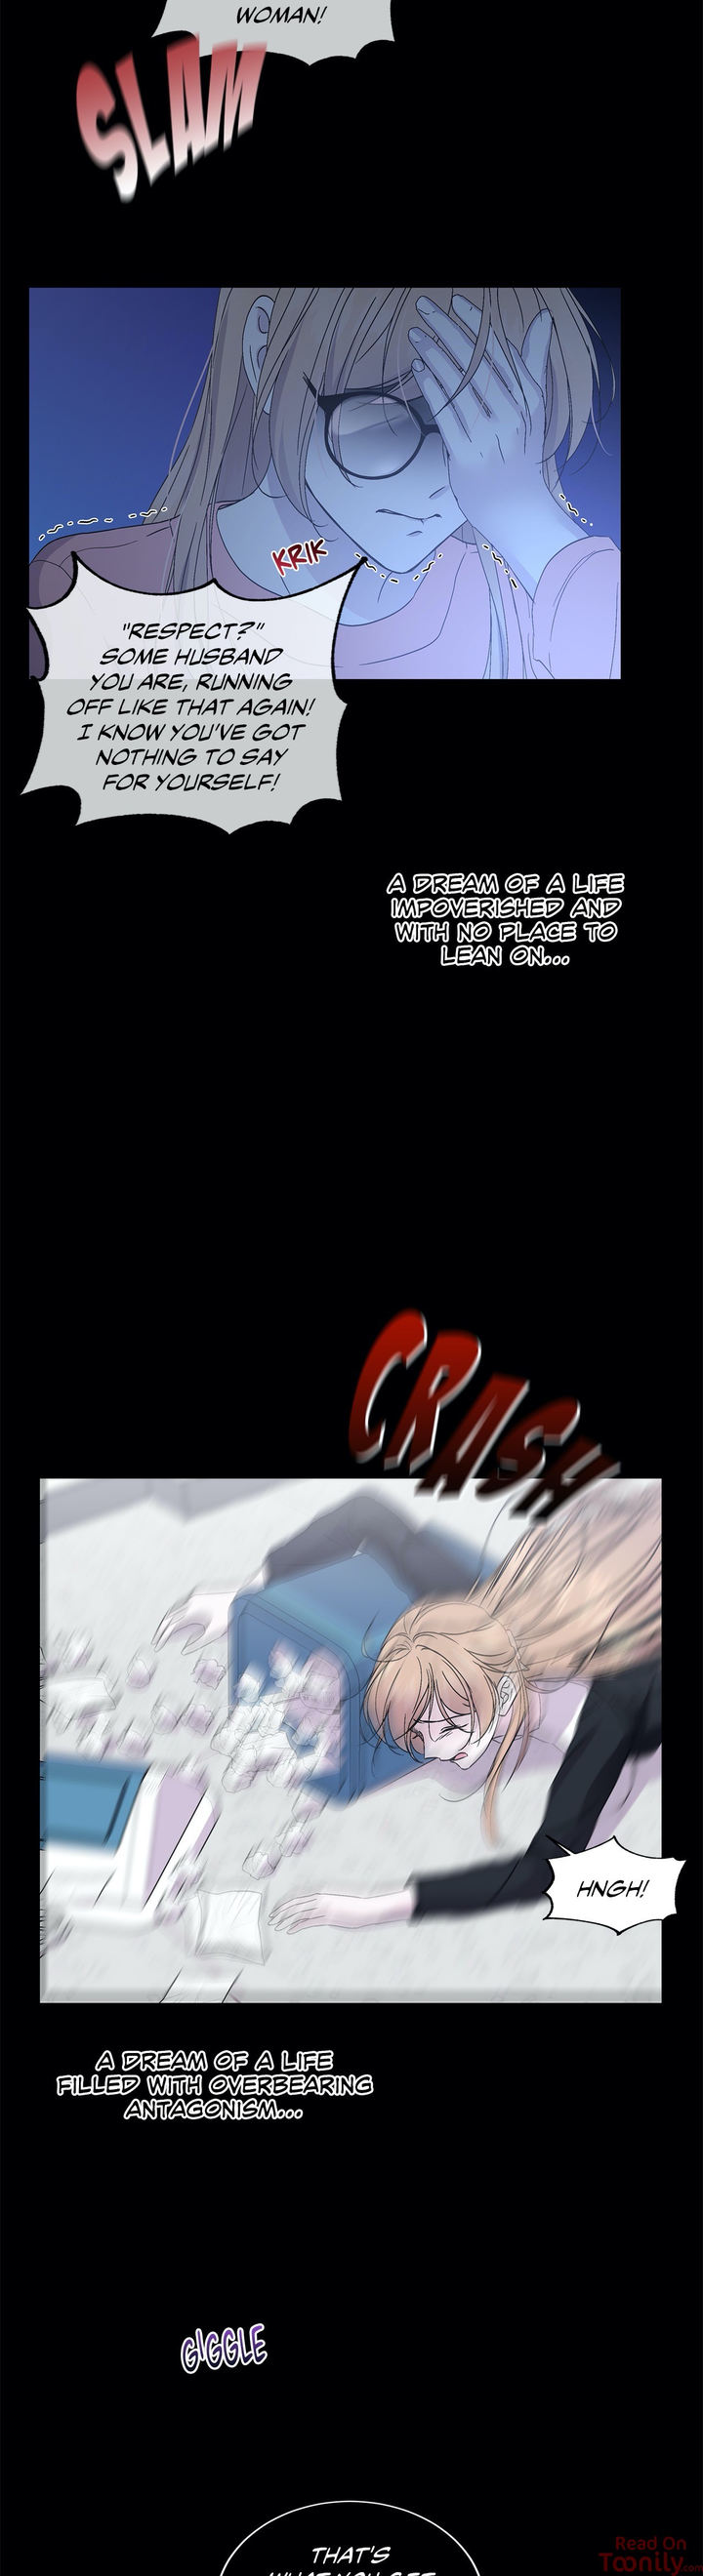 Lilith 2 - Chapter 30 Page 2